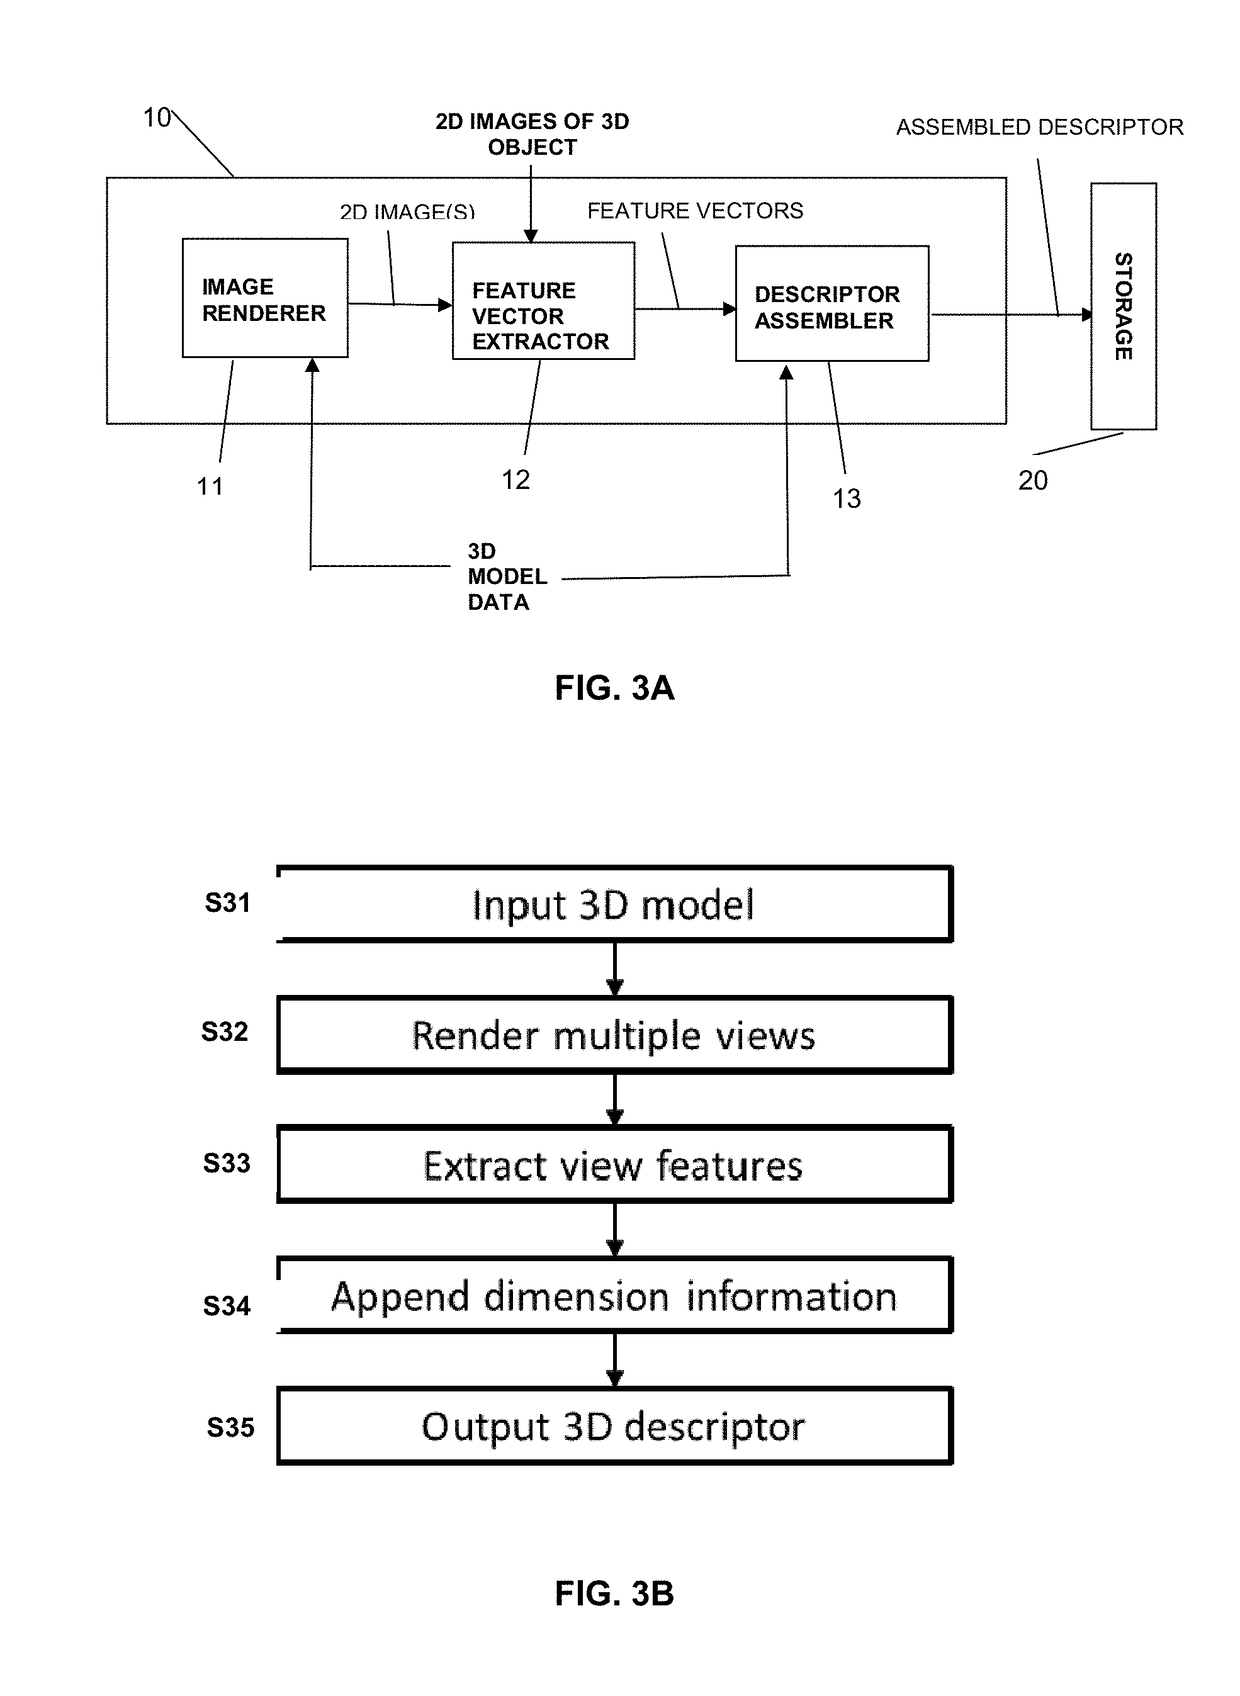 Method and apparatus for searching a database of 3D items using descriptors